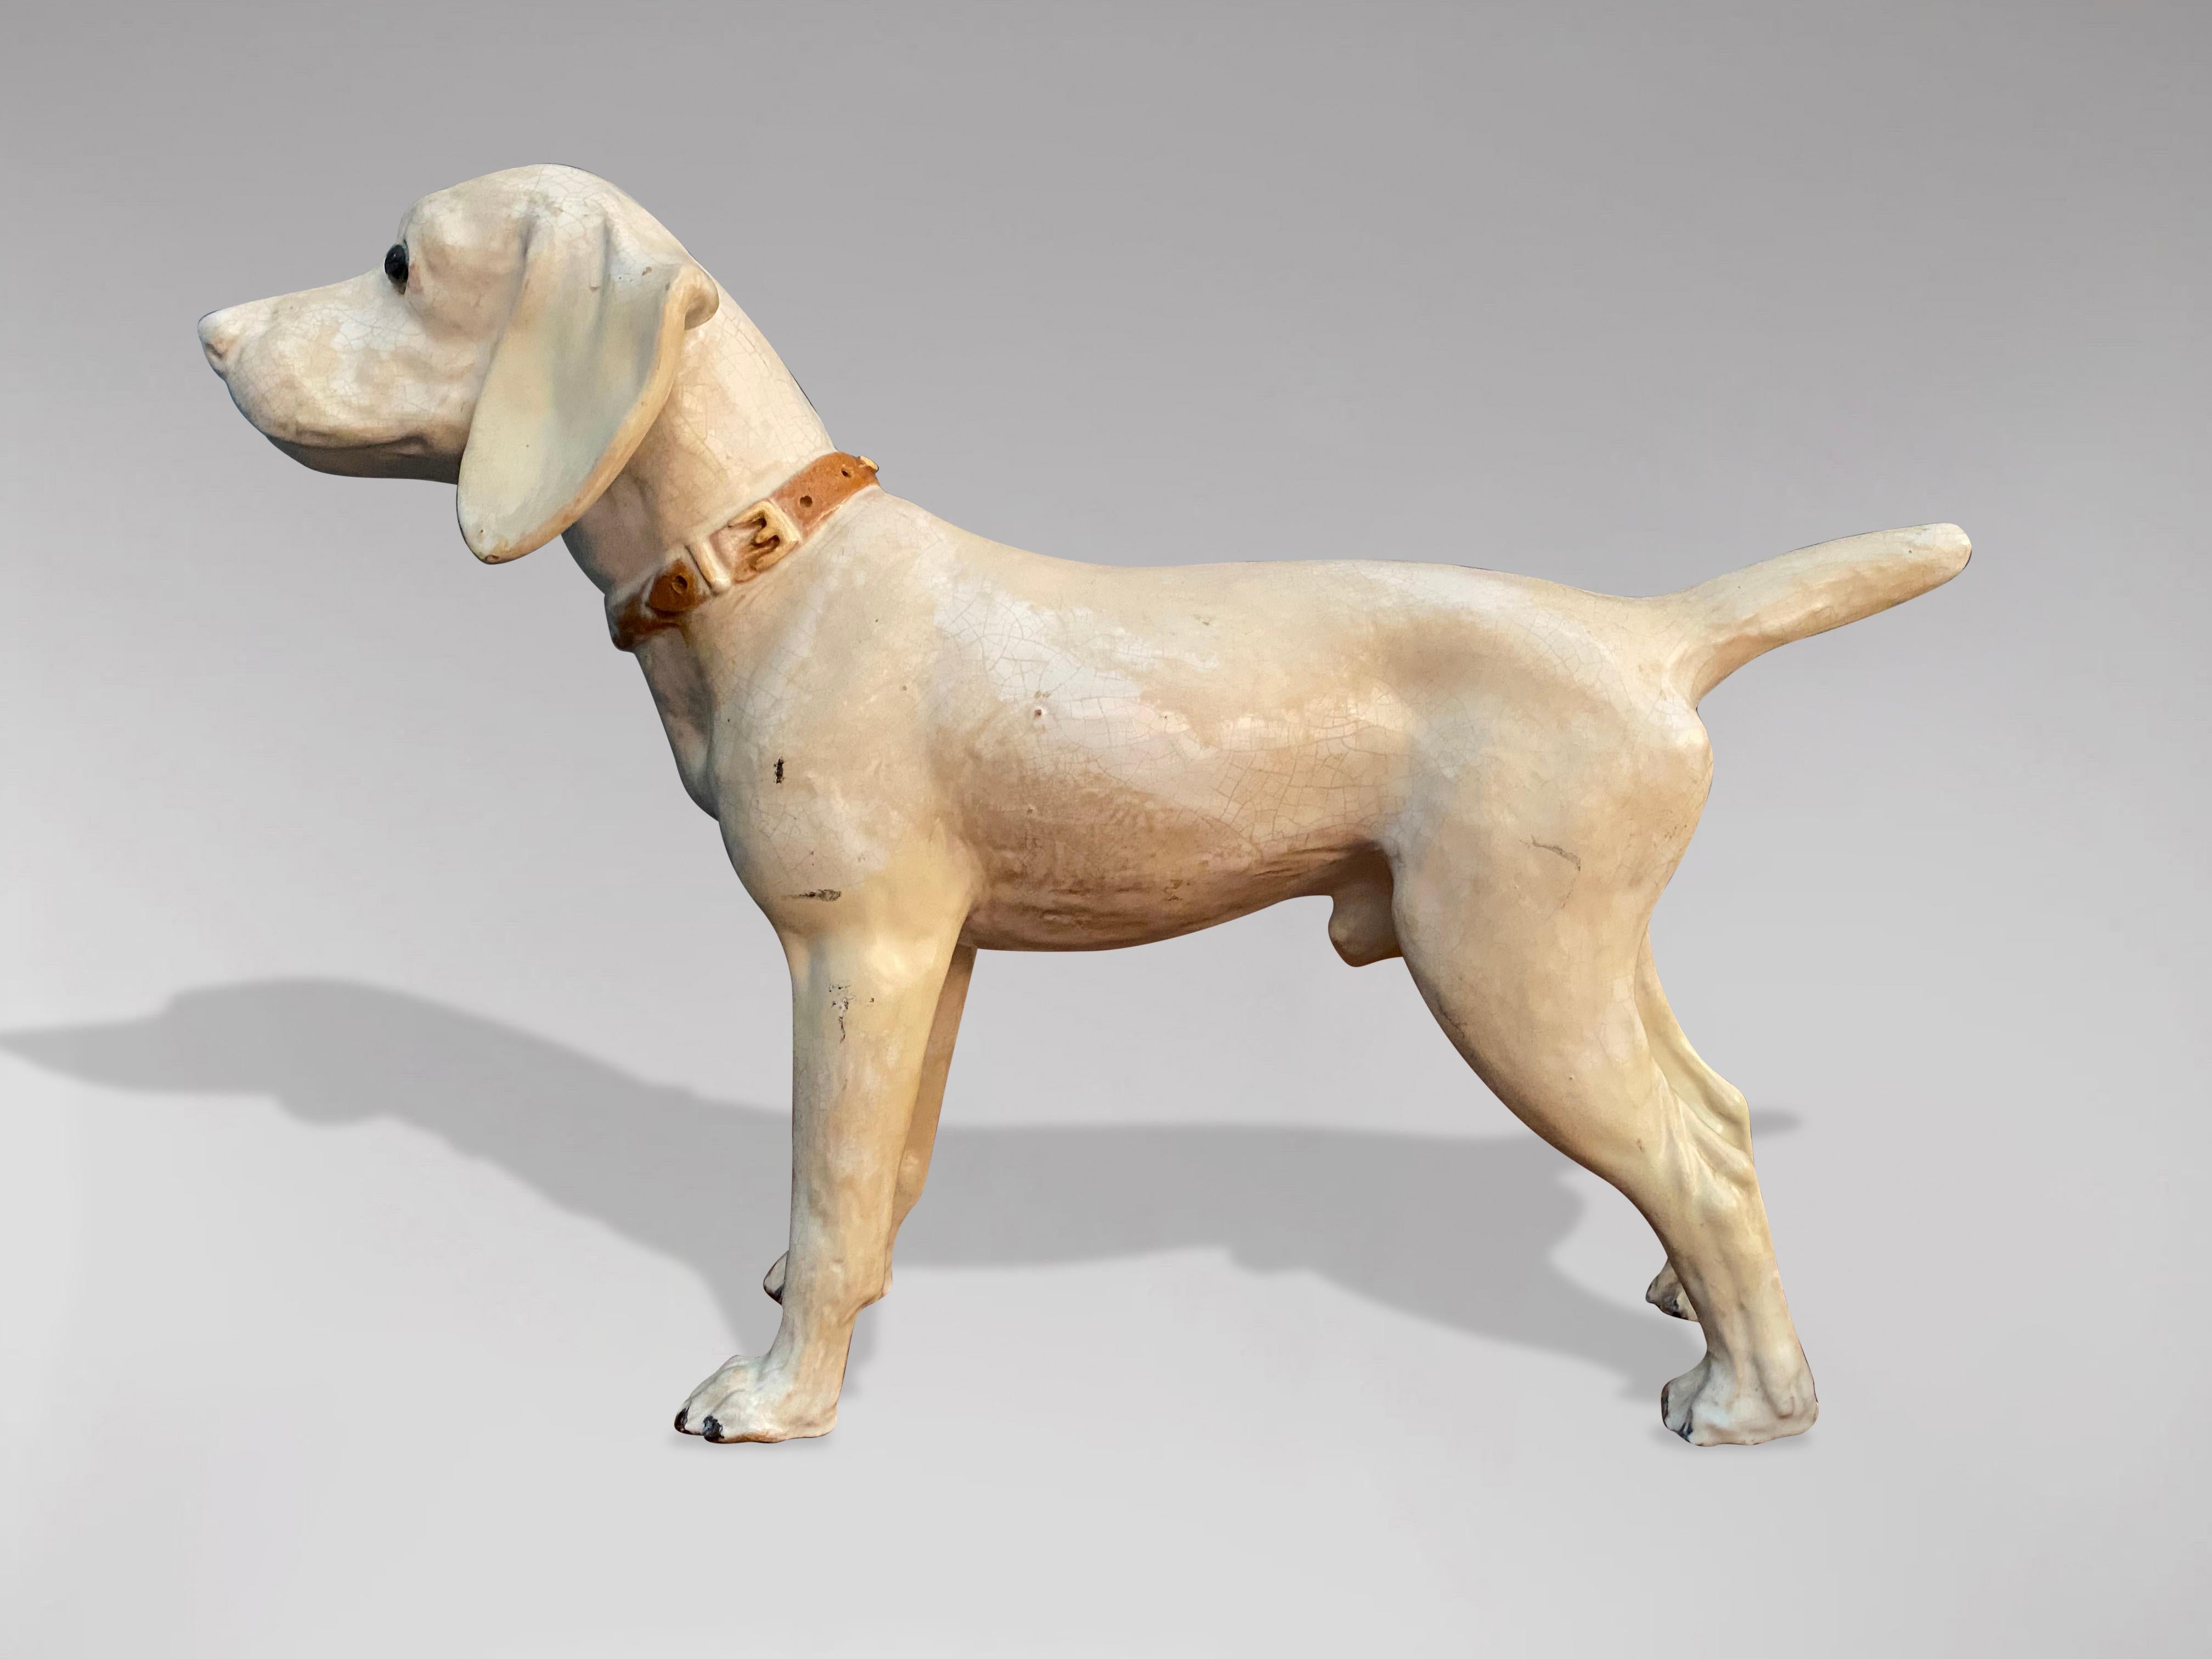 A great looking late 19th century French dog sculpture in earthenware from Bavent in Normandy. The dogs coat of different shades of white as well as its expressive look testifies to the quality of its craftsmanship. In perfect and original condition